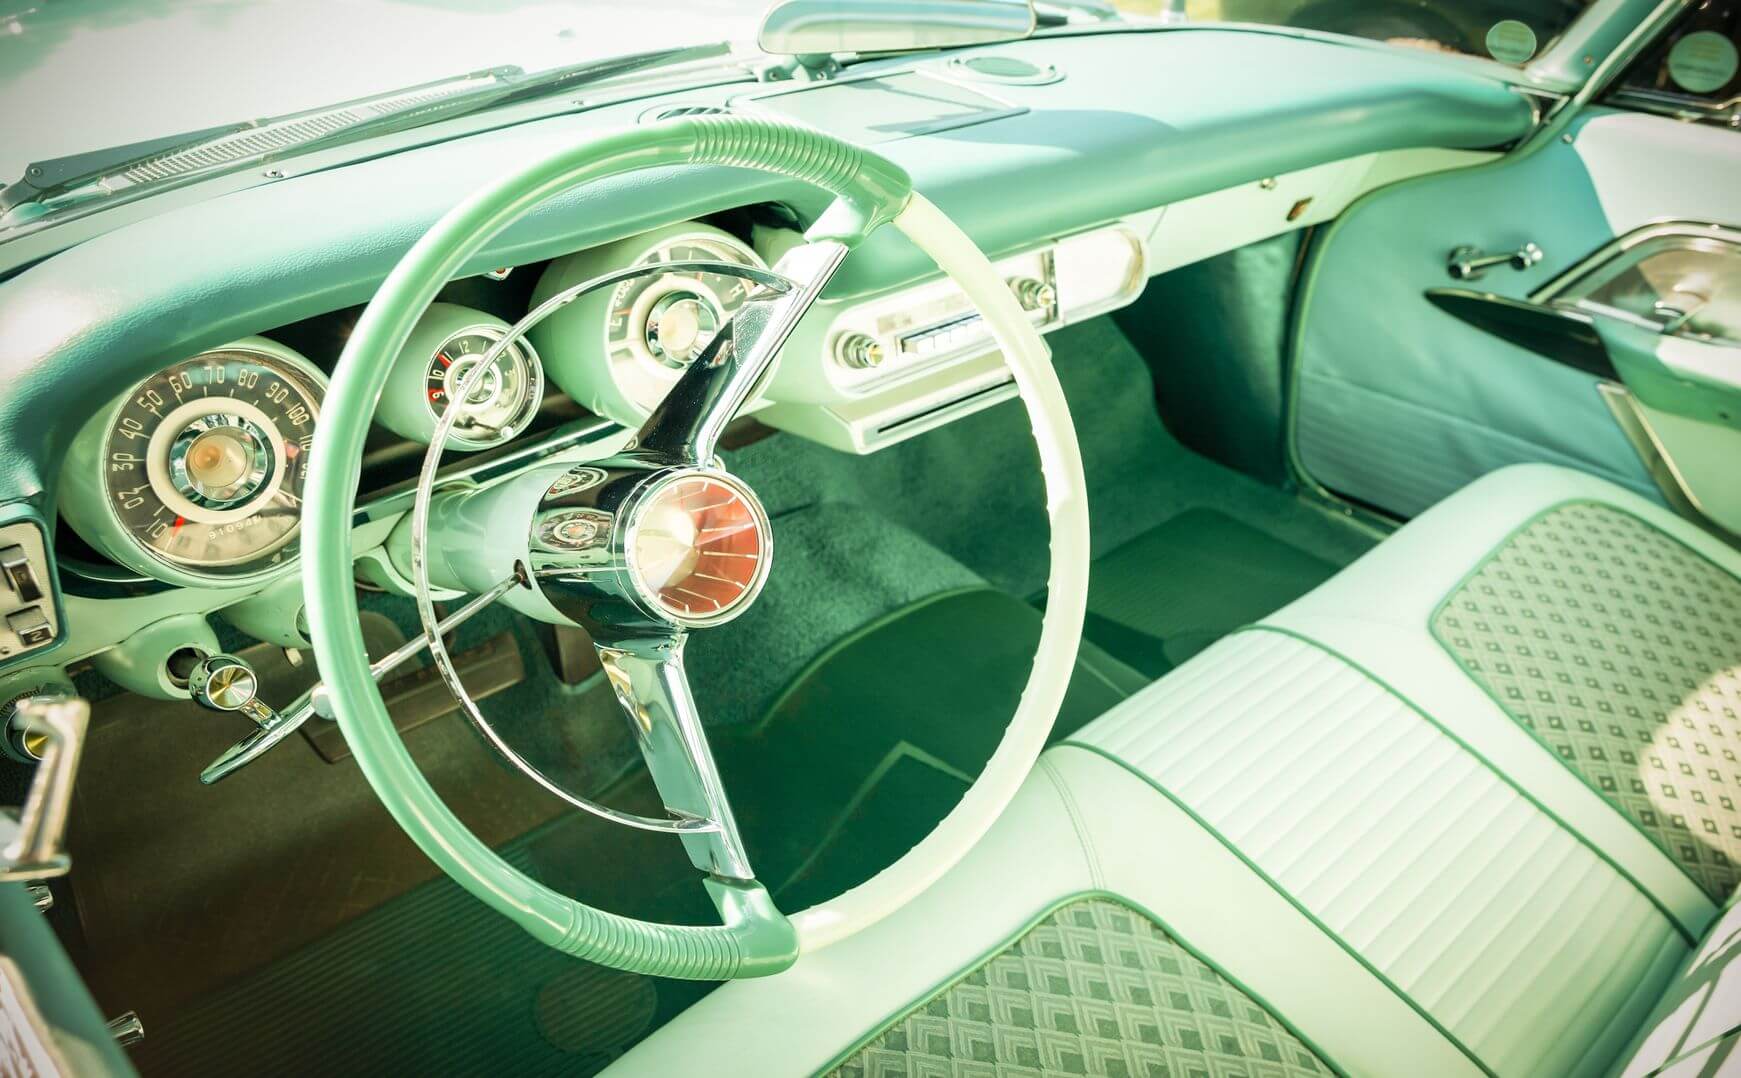 Looking in at the seats of an old automobile